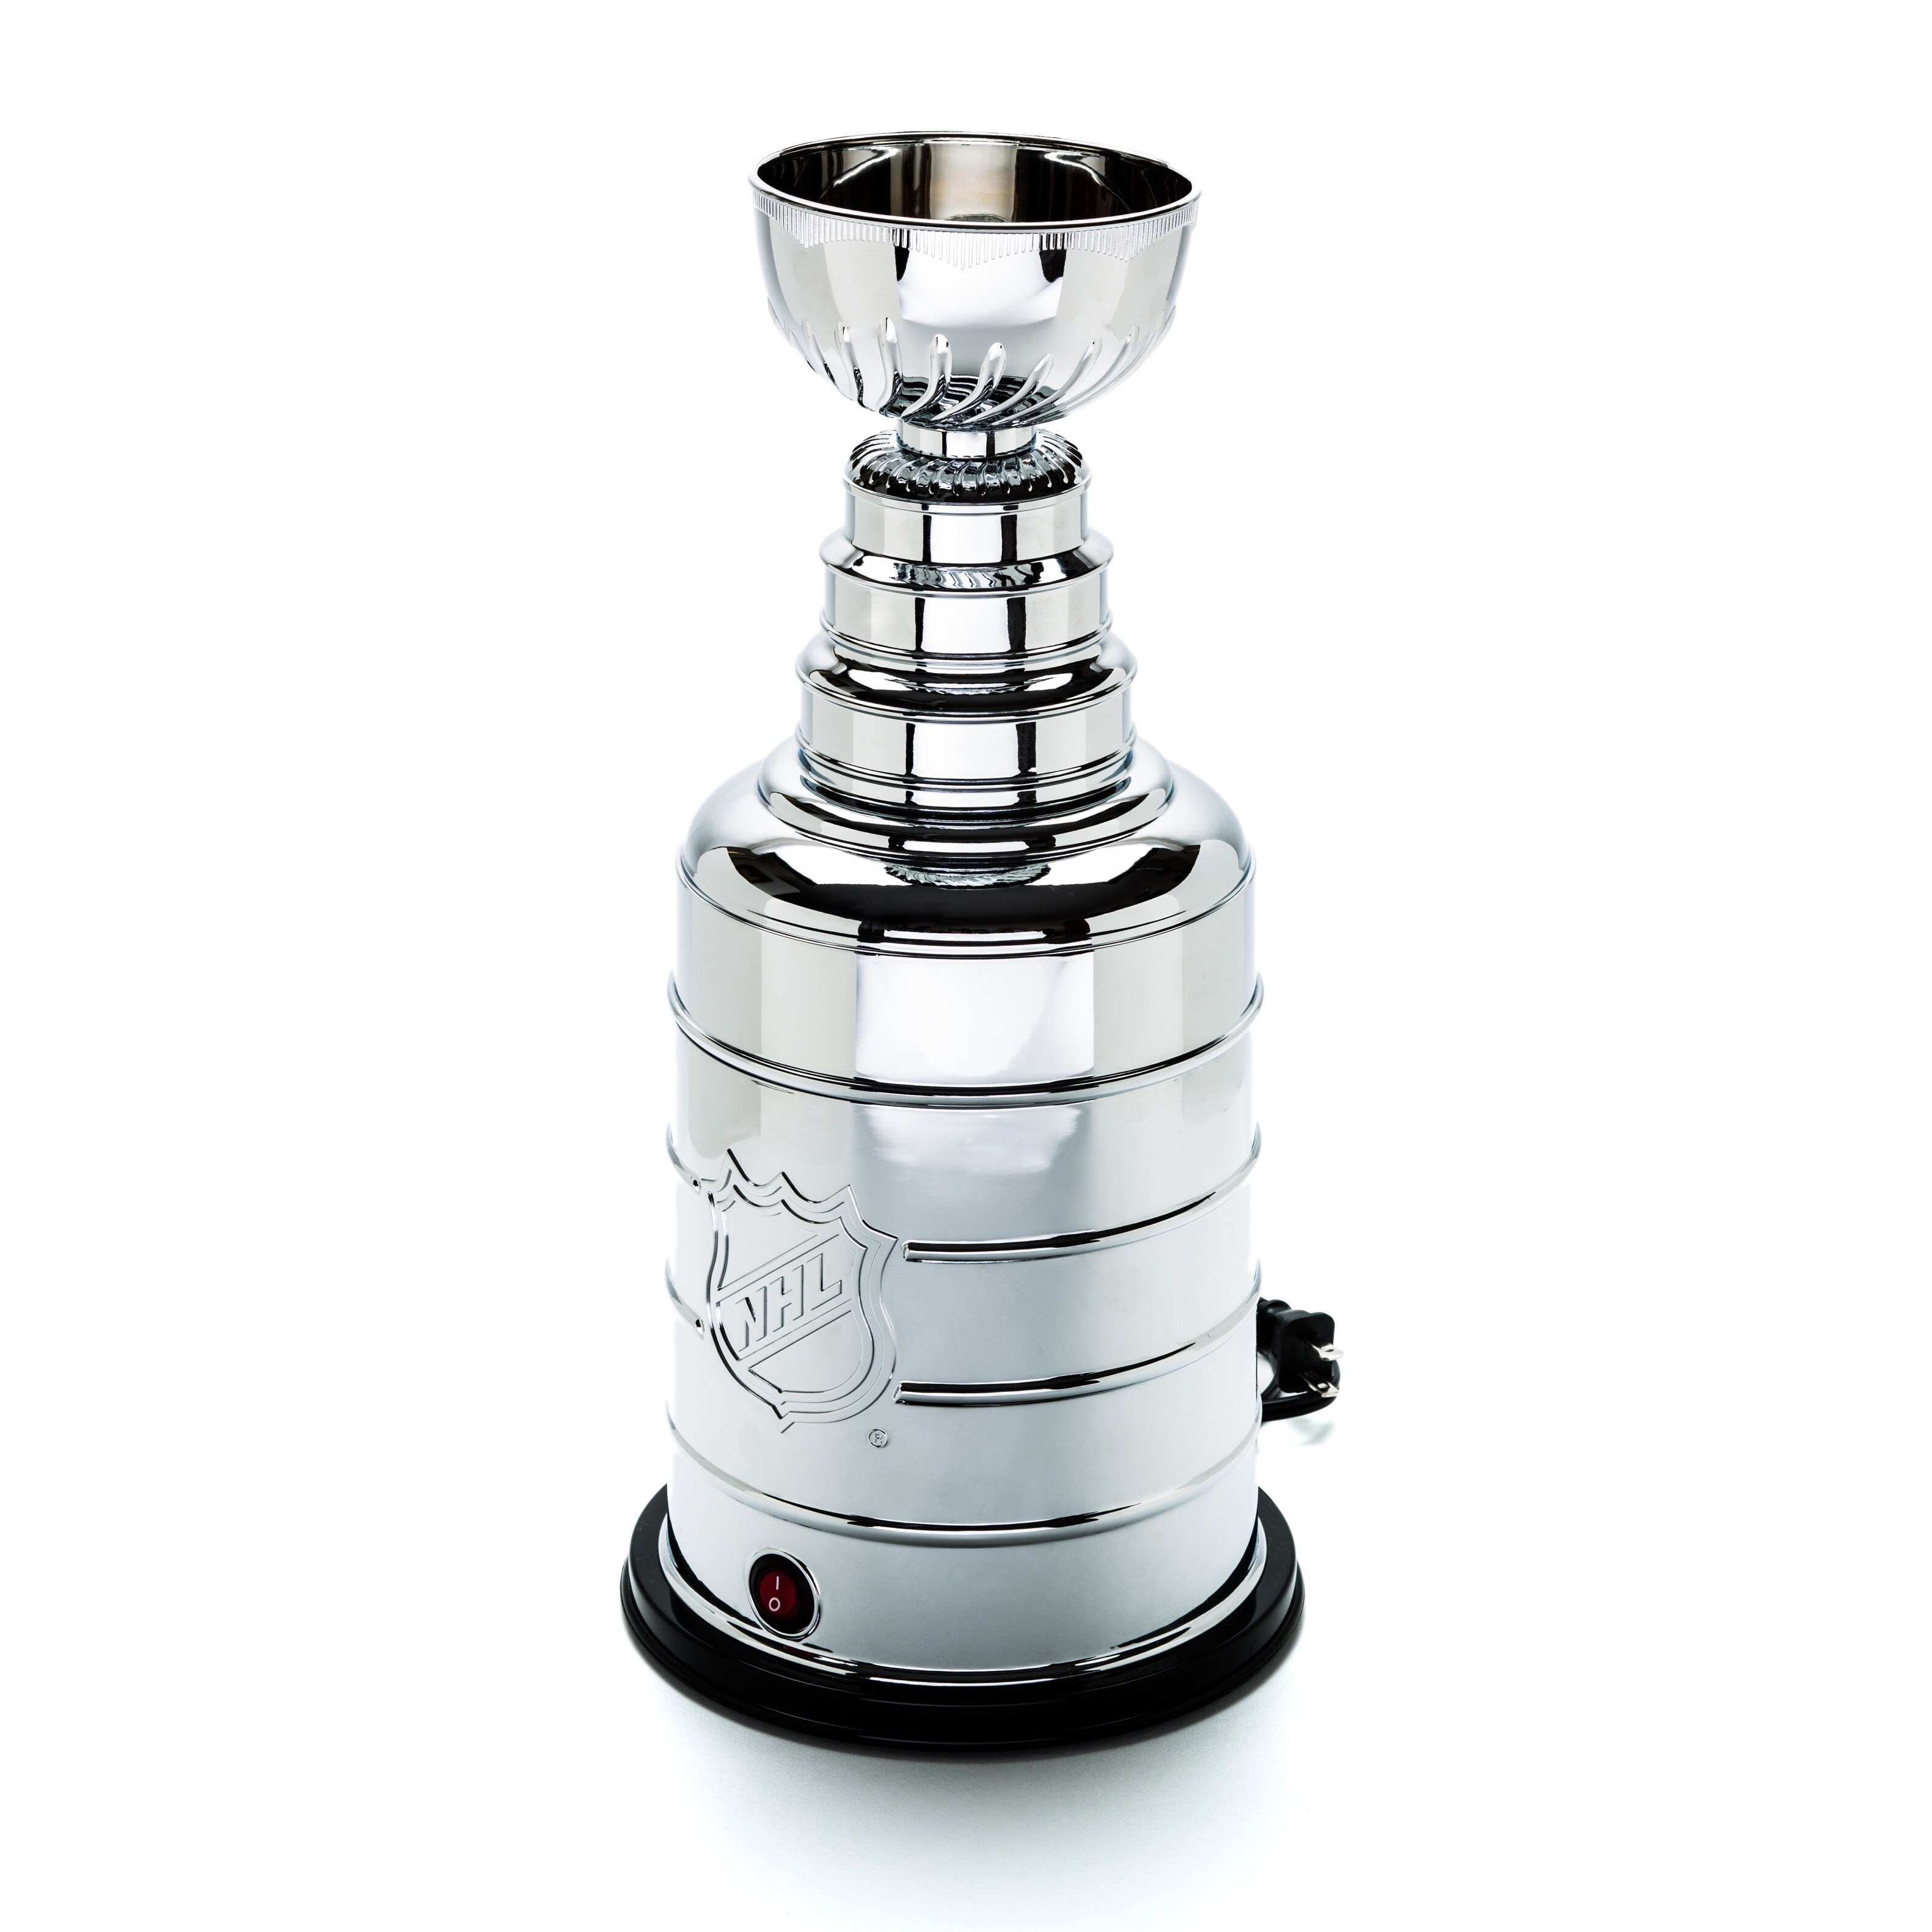 Ugly sweater party: The Robo-Pen gets in the way of a Stanley Cup